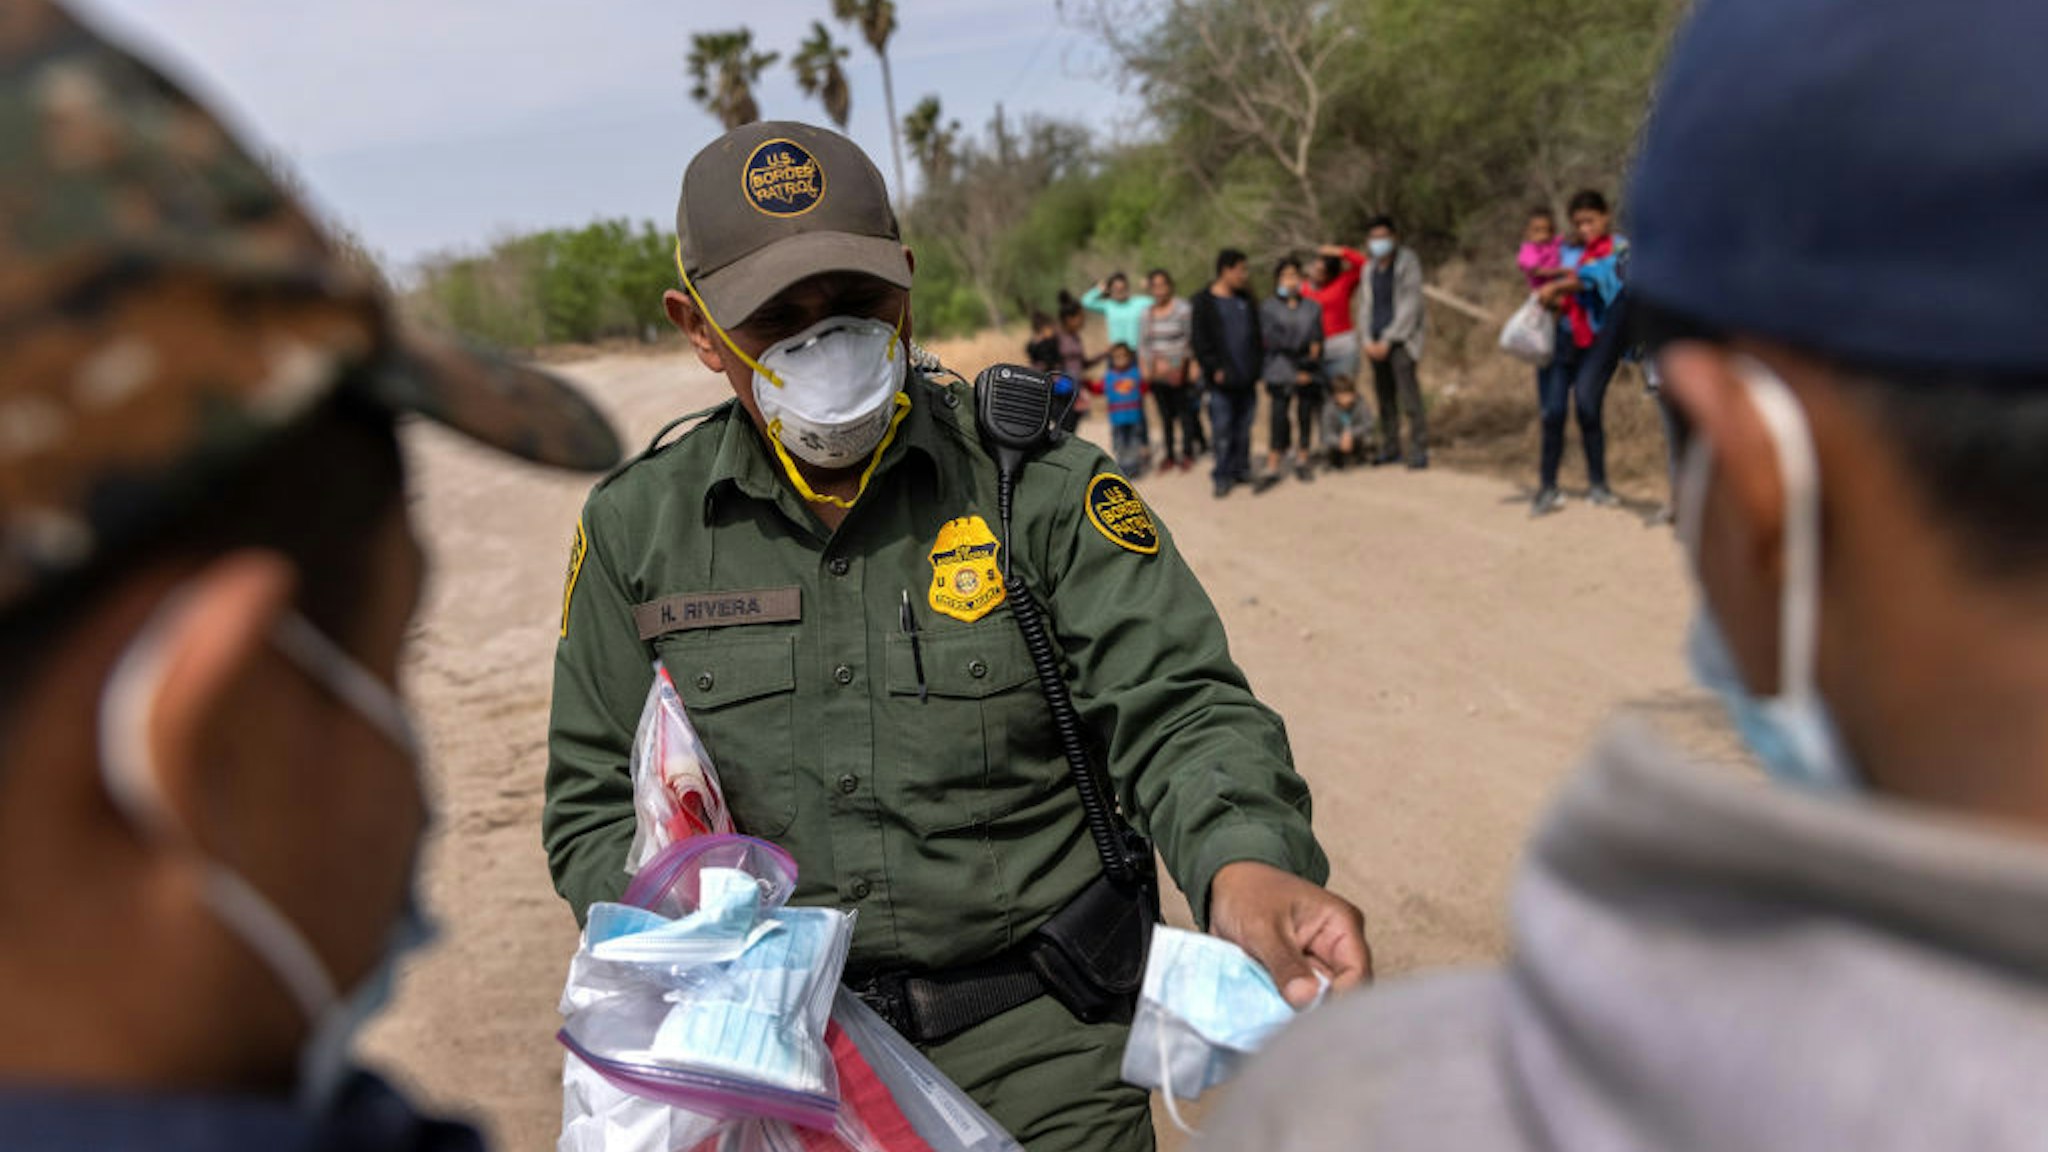 HIDALGO, TEXAS - MARCH 25: A U.S. Border Patrol agent hands out masks to unaccompanied minors after a group of asylum seekers crossed the-Rio Grande into Texas on March 25, 2021 in Hidalgo, Texas. A large group of families and unaccompanied minors, mostly teenagers, came across the border onto private property, where Border Patrol agents took aside the unaccompanied minors for separate transport. The Biden administration is permitting minors to stay in the U.S., whereas many families, especially with older children, are being deported. (Photo by John Moore/Getty Images)